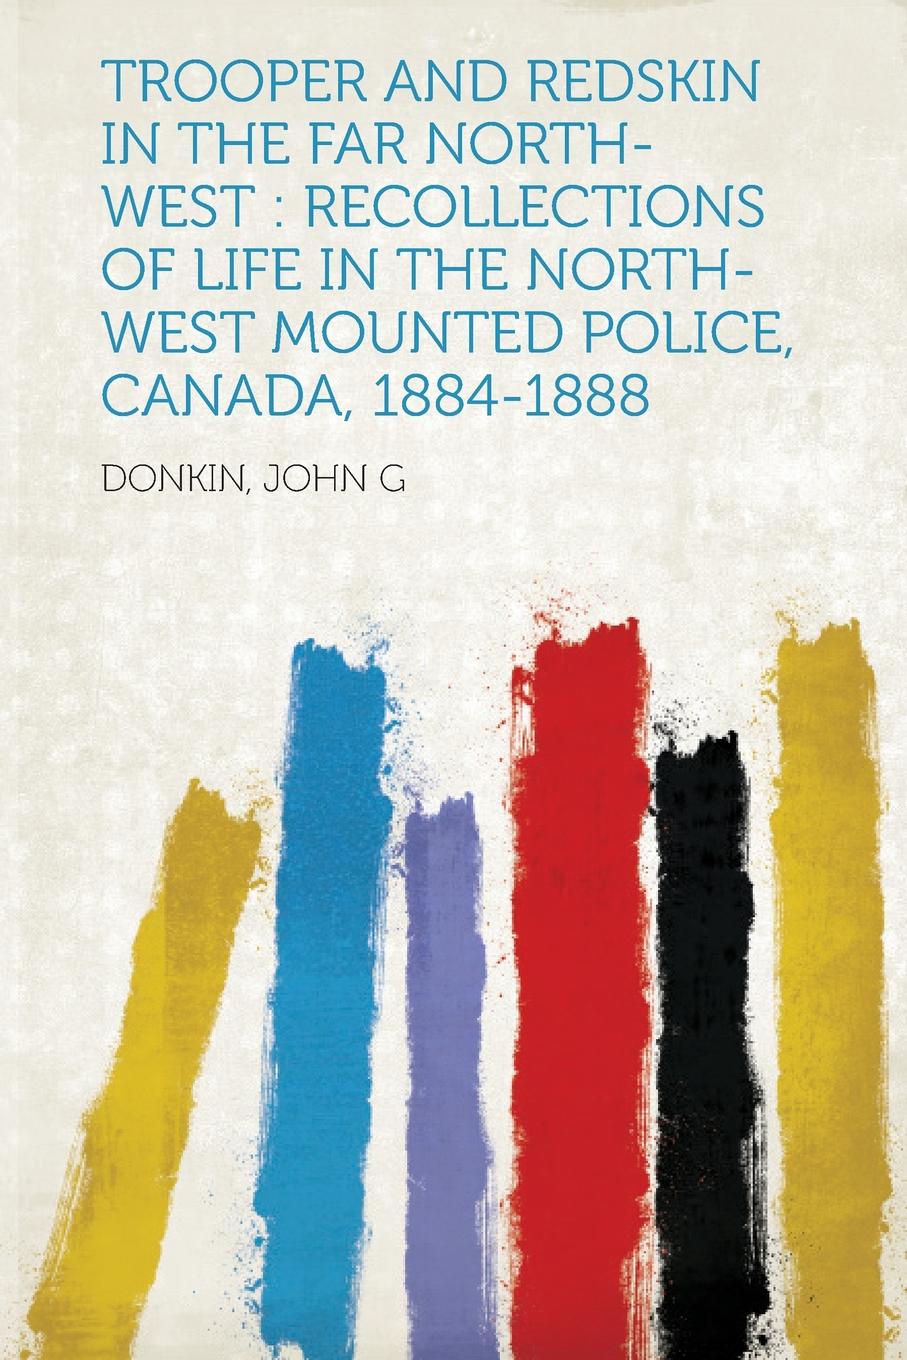 Trooper and Redskin in the Far North-West. Recollections of Life in the North-West Mounted Police, Canada, 1884-1888